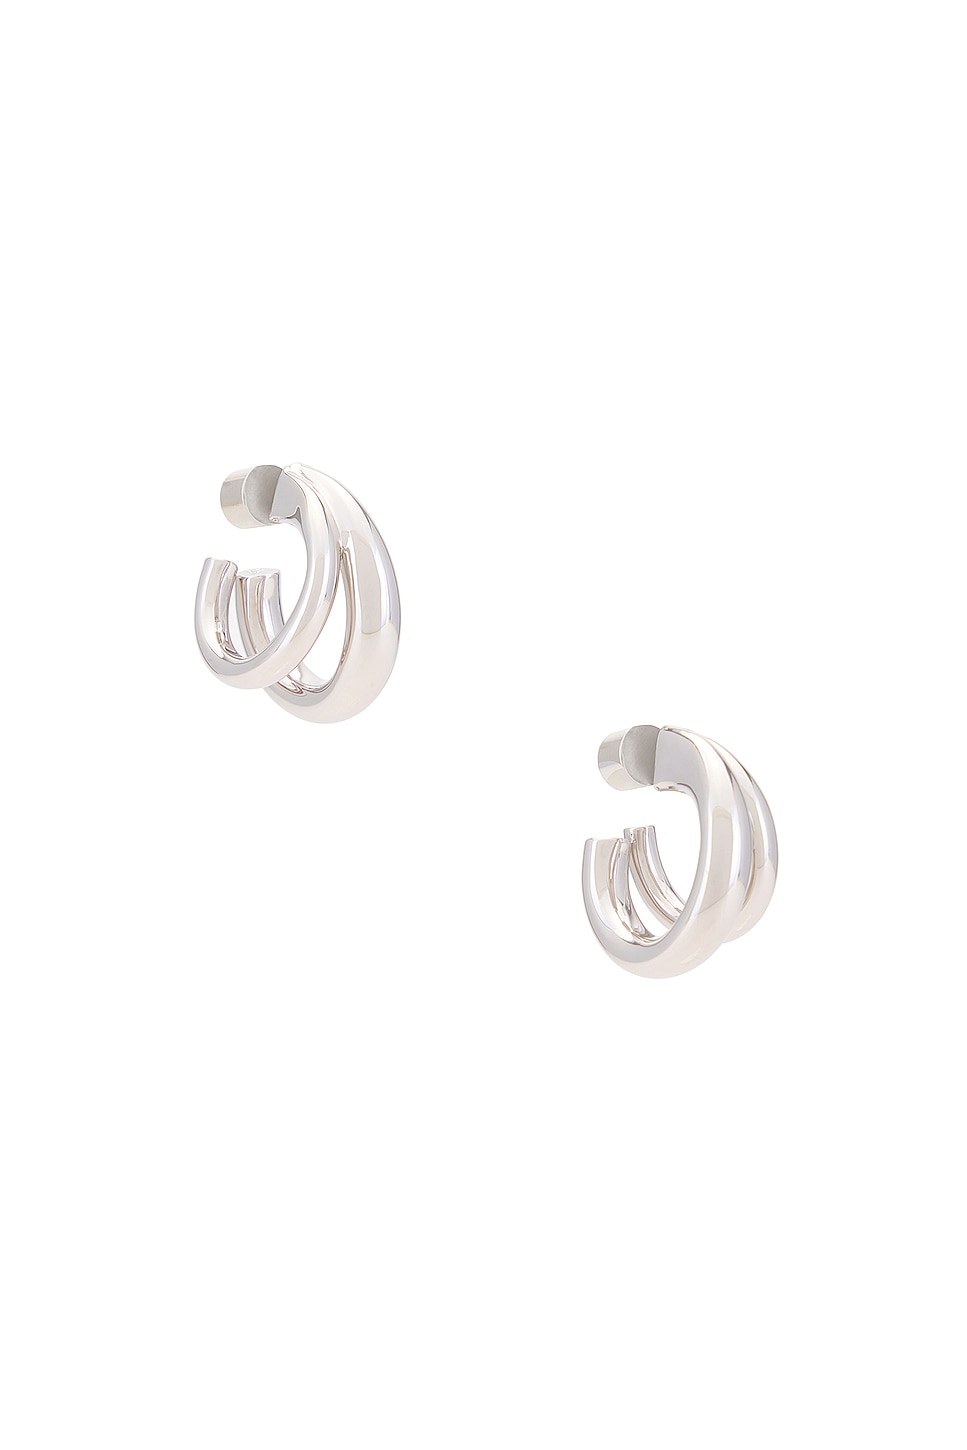 Image 1 of Jennifer Fisher Natasha & Lilly Double Huggie Earrings in Silver